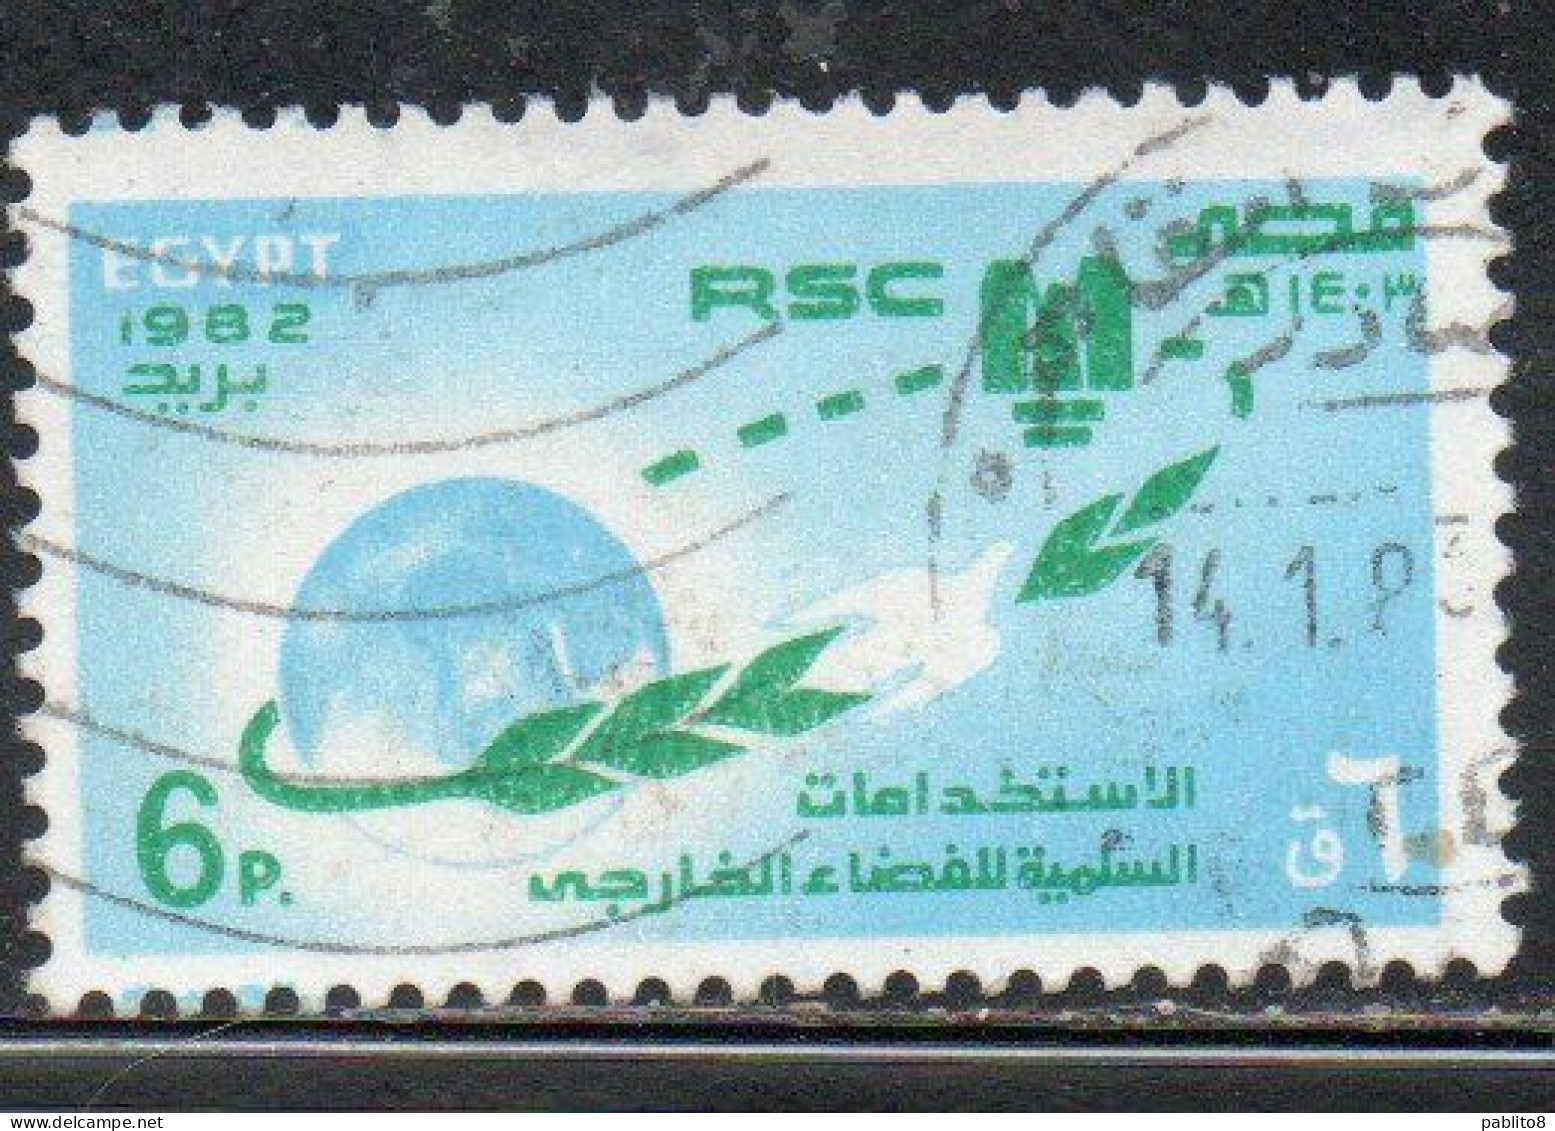 UAR EGYPT EGITTO 1982 UN ONU CONFERENCE ON PEACEFUL USES OF OUTER SPACE VIENNA 6p USED USATO OBLITERE' - Used Stamps